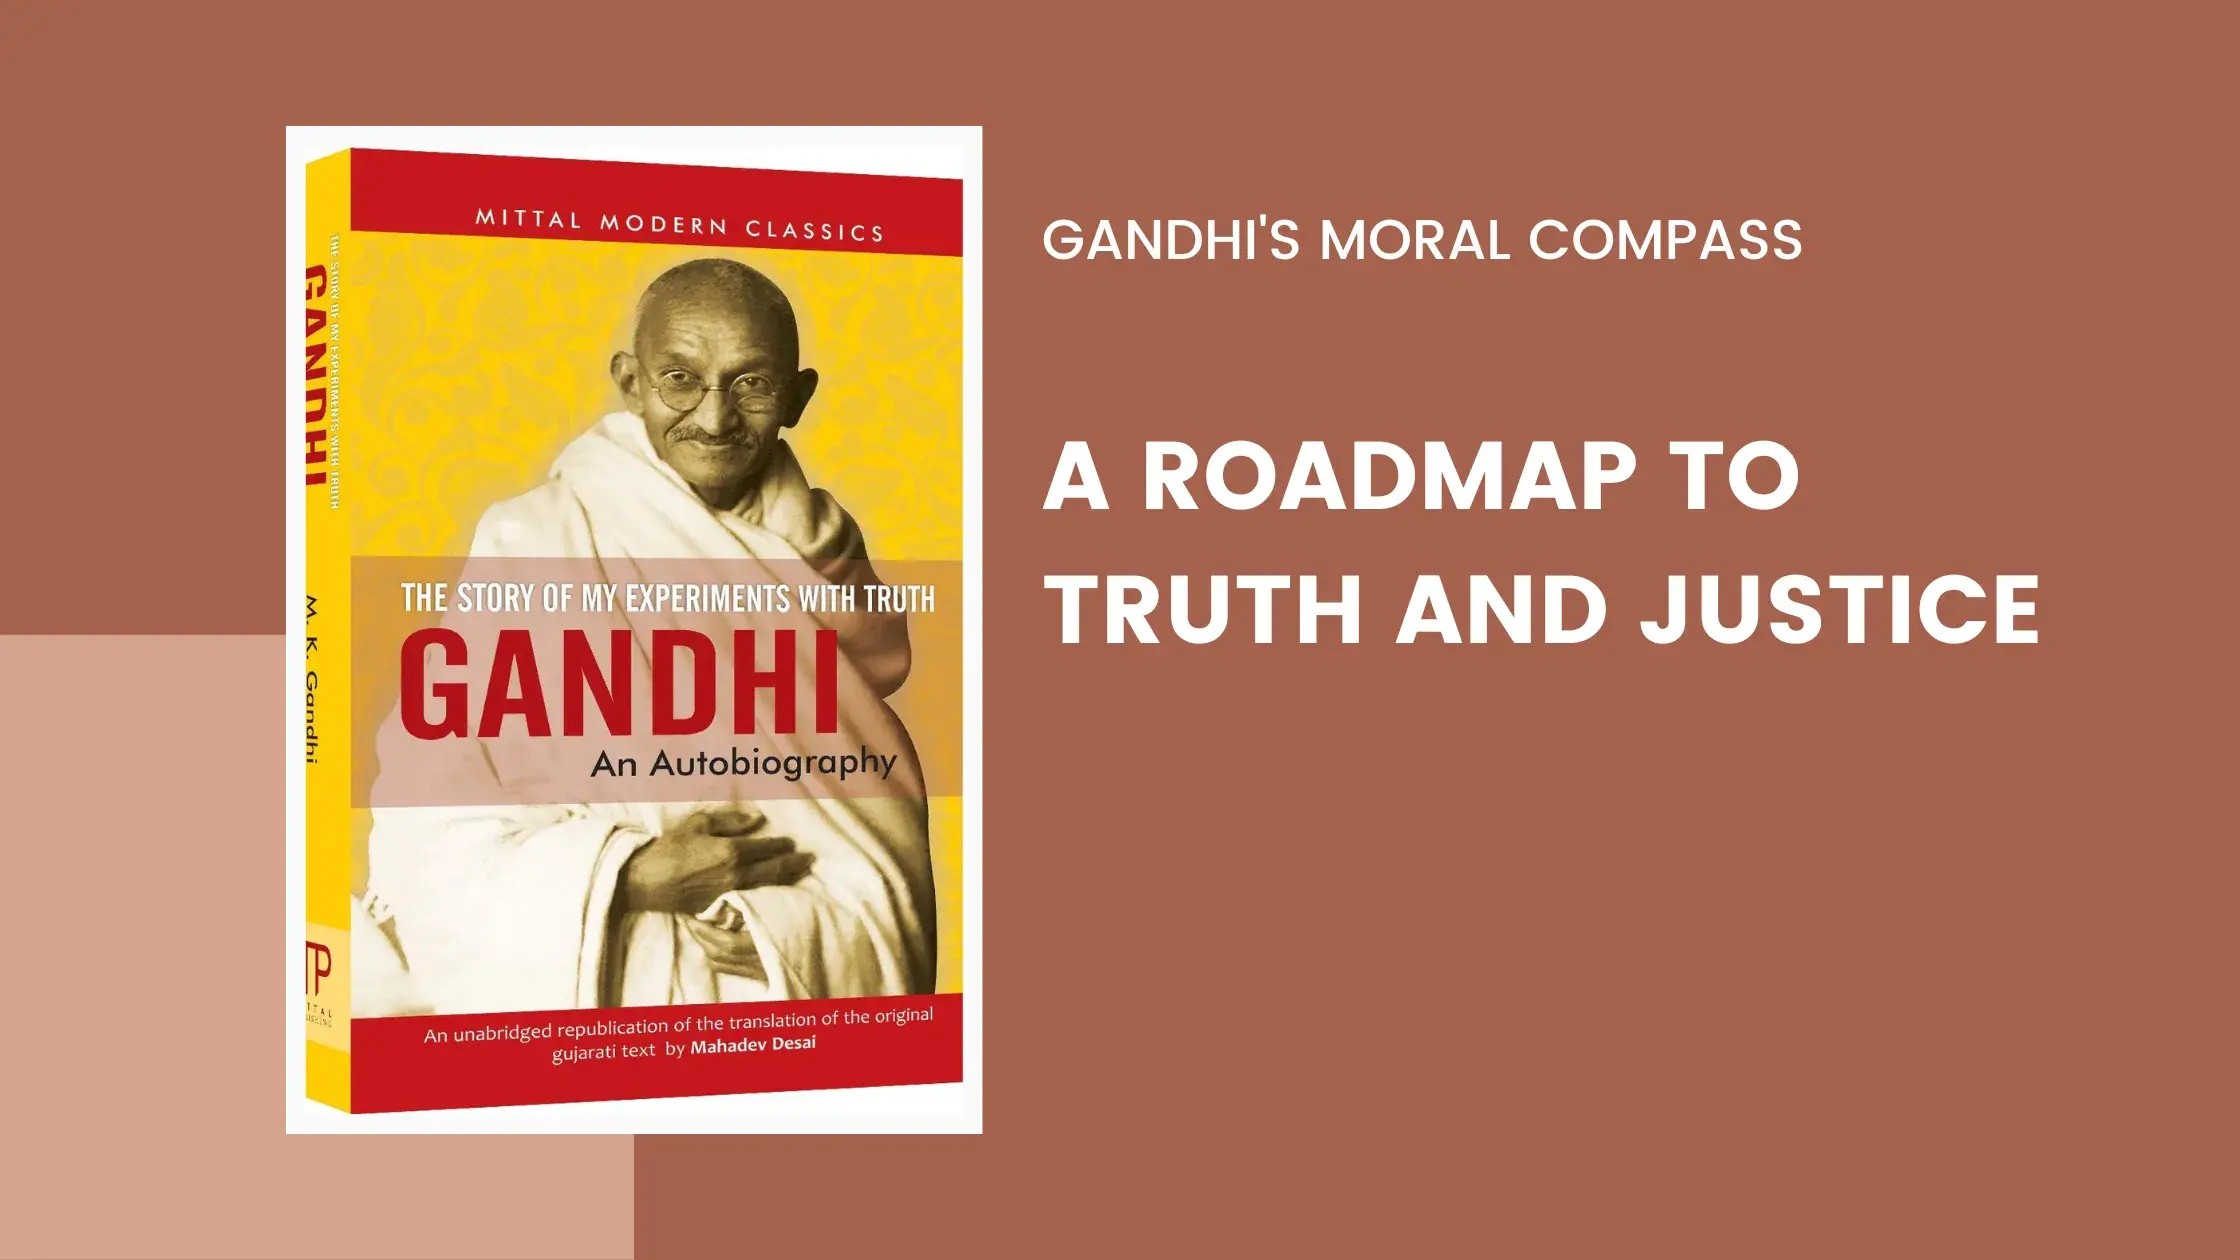 Gandhi's Moral Compass: A Roadmap to Truth and Justice